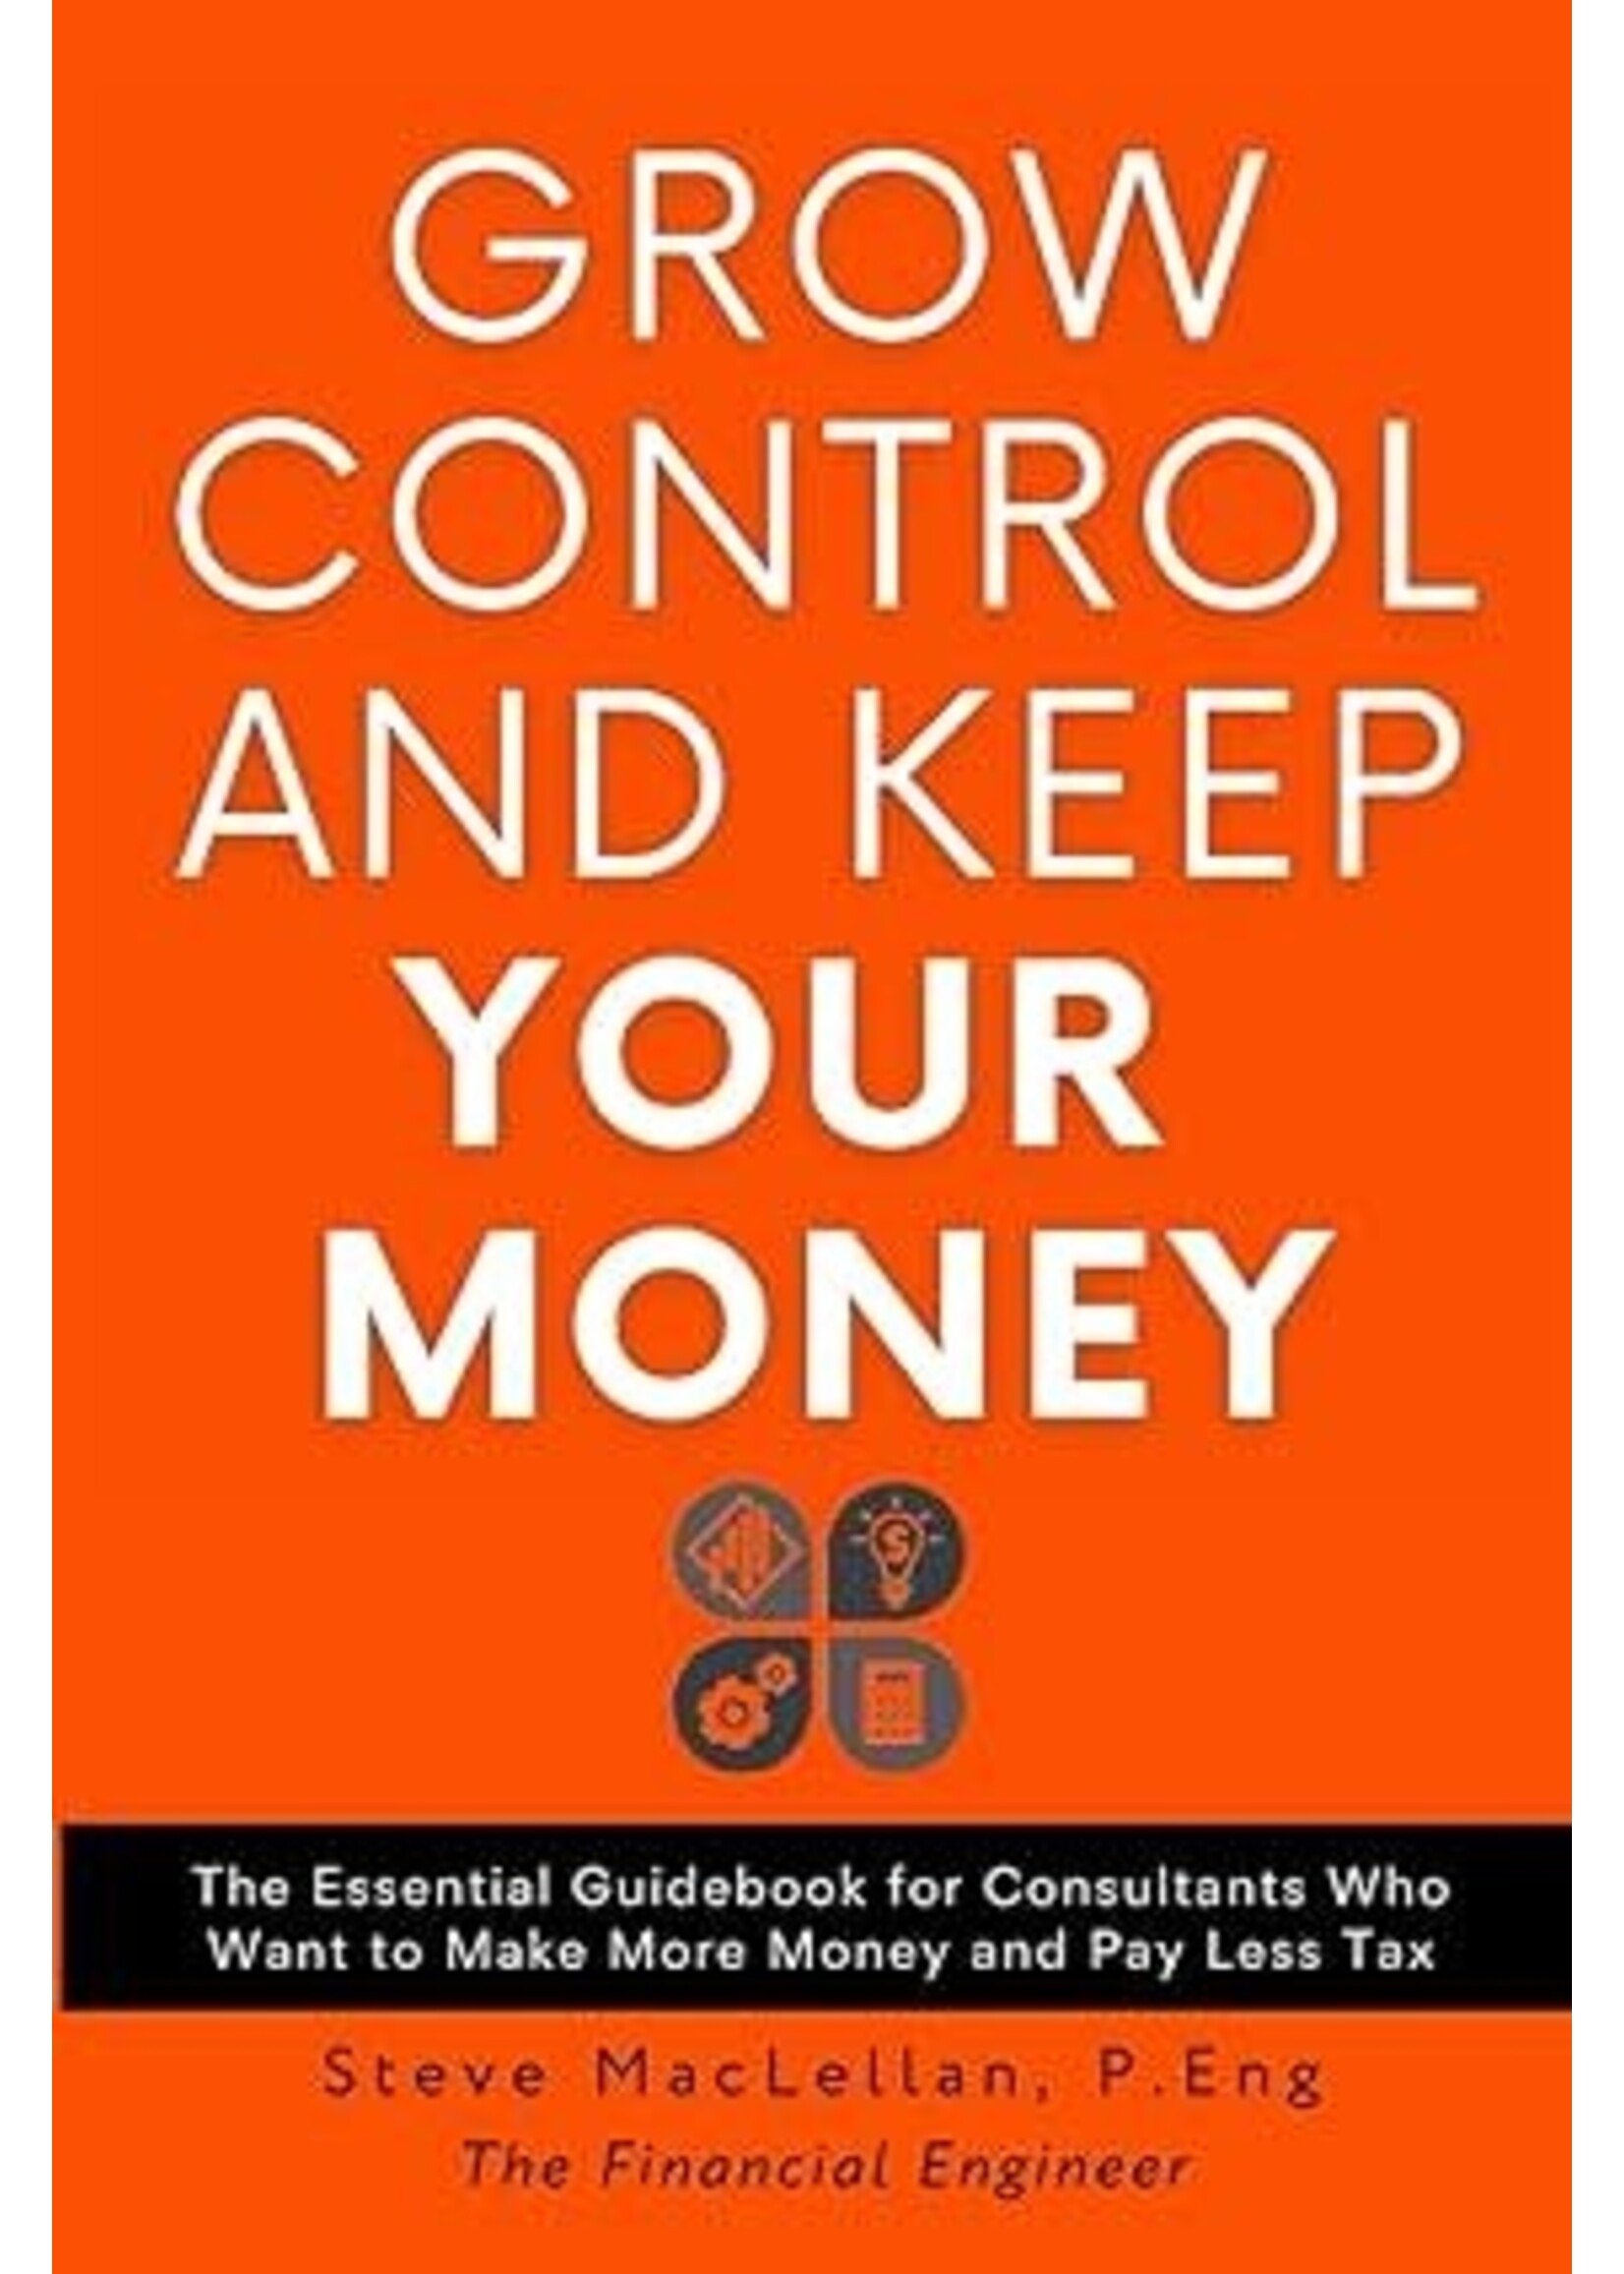 Grow Control and Keep Your Money by Steve MacLellan